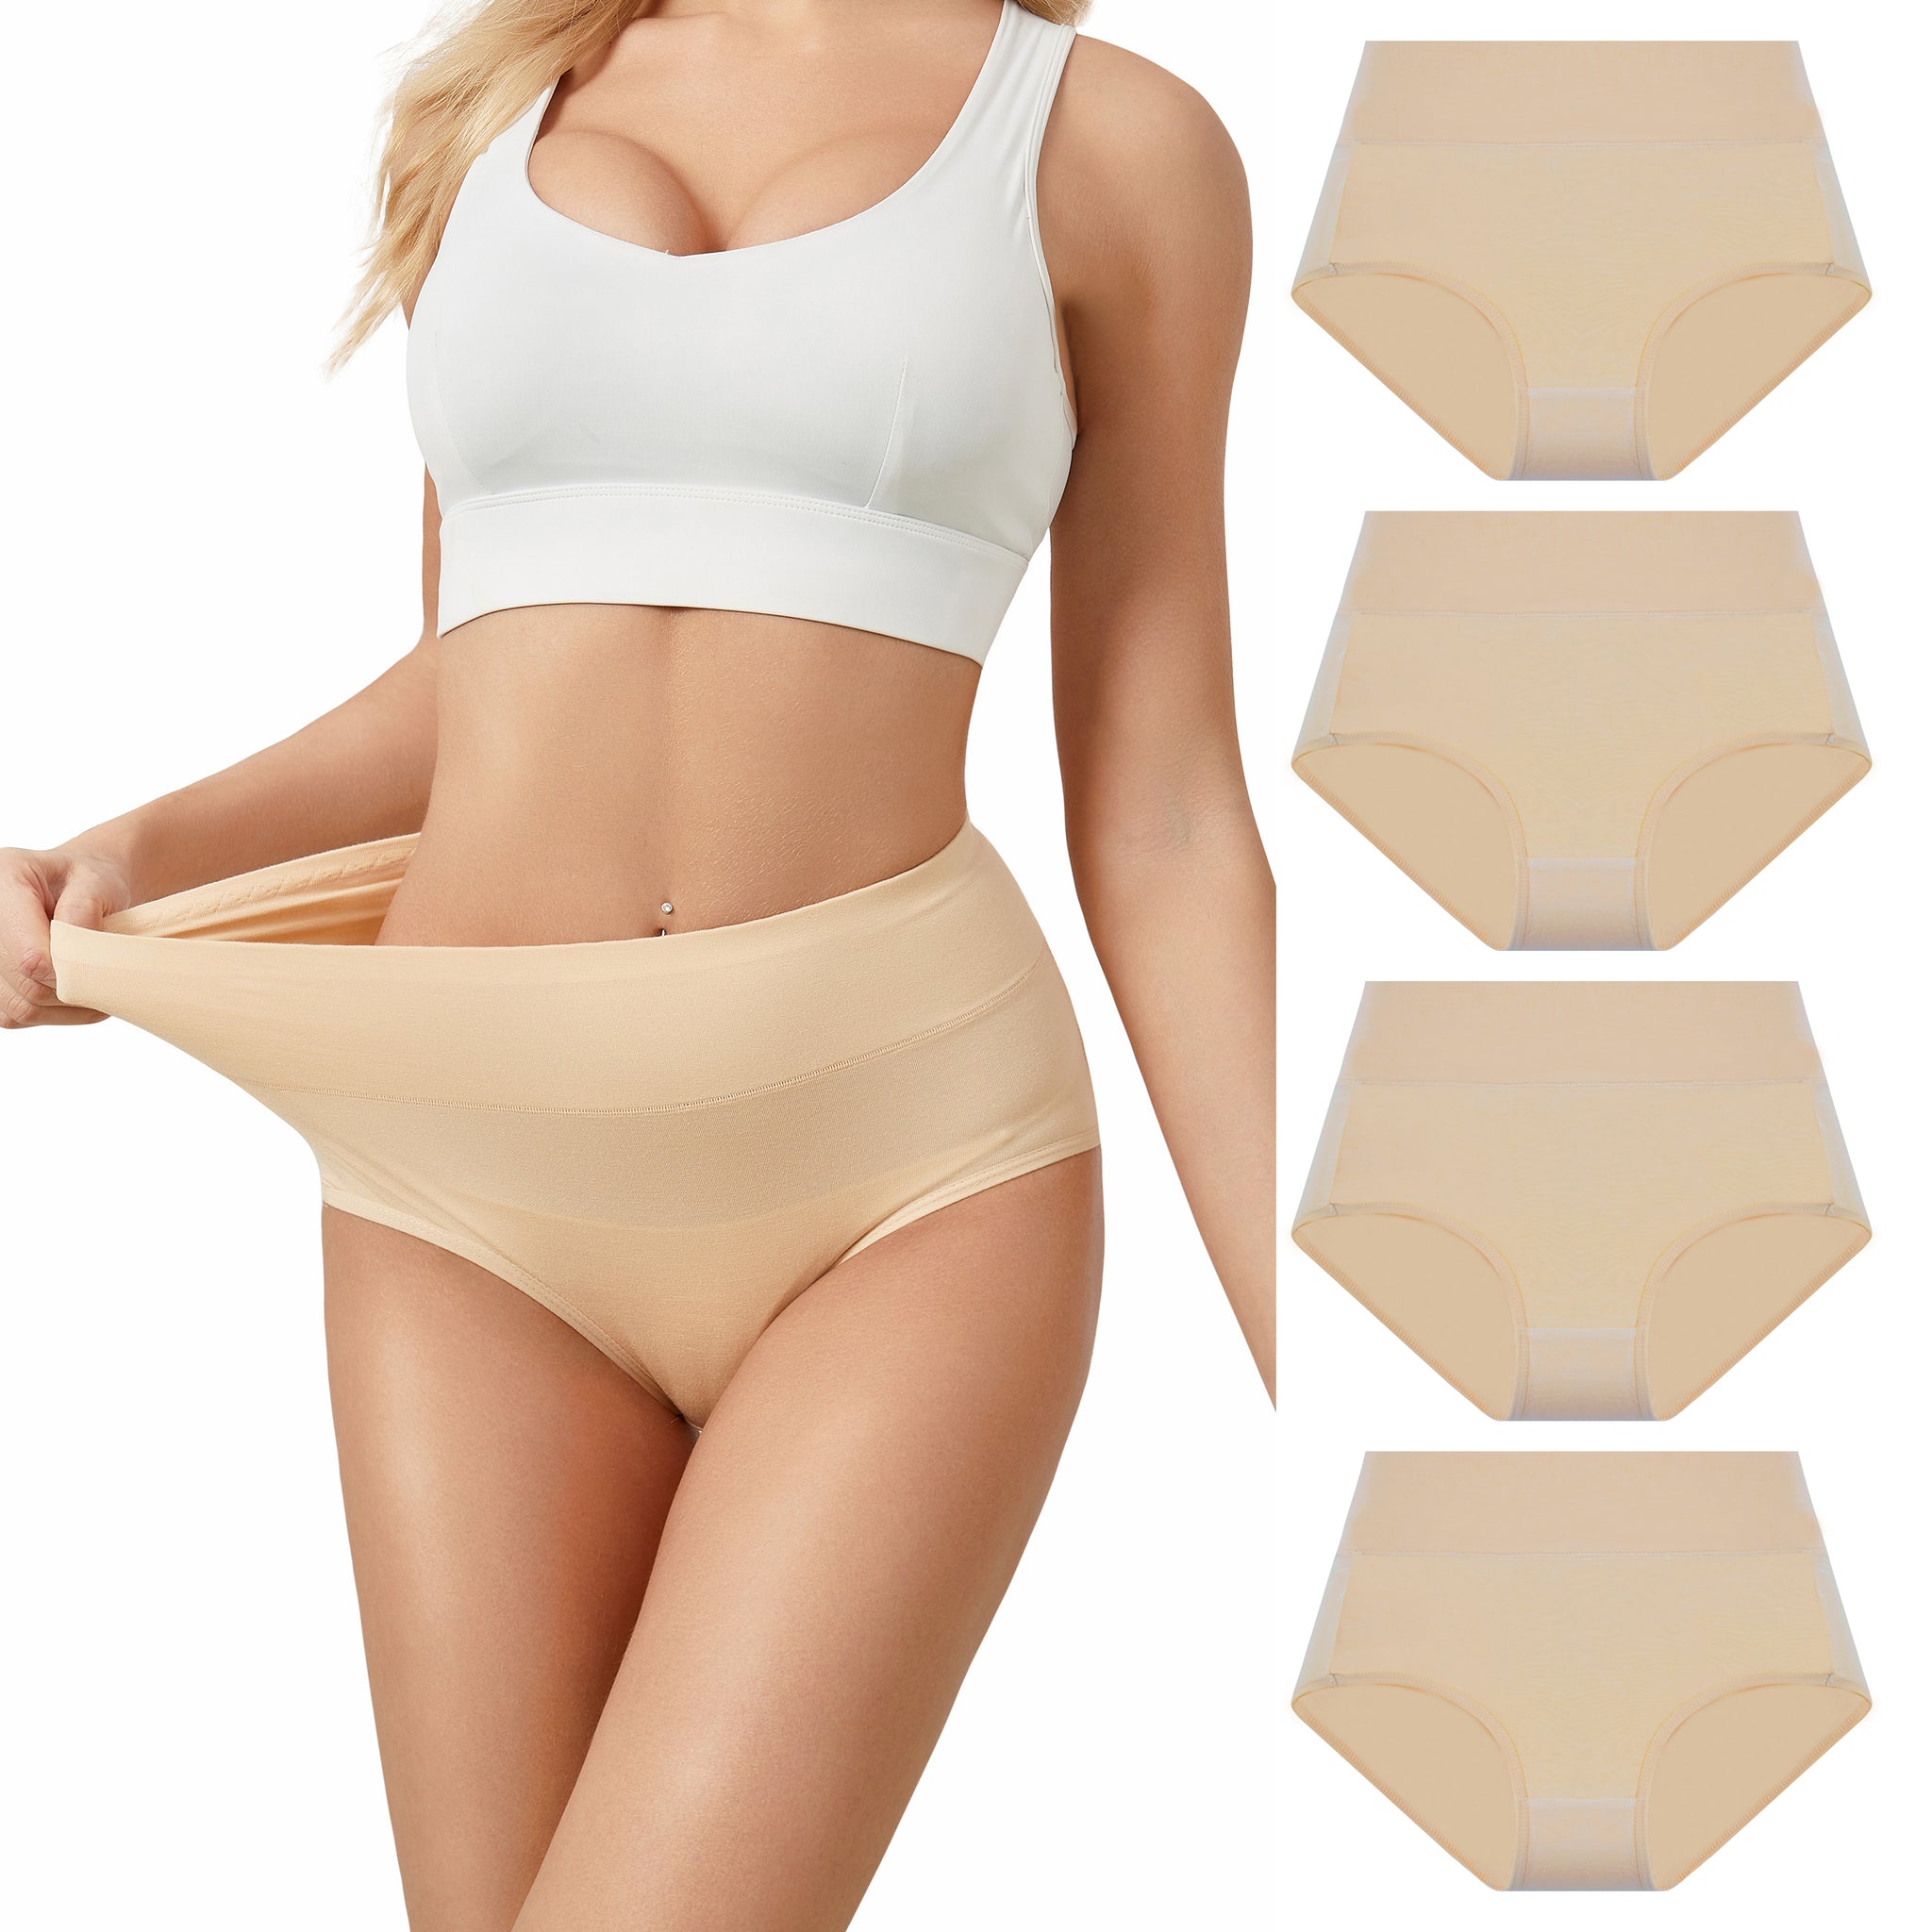  SERISIMPLE Bamboo Women Luxury Underwear Silky Comfy Ultra  Soft Briefs Breathable Stretch High&Mid Waist Panties 4 Pack